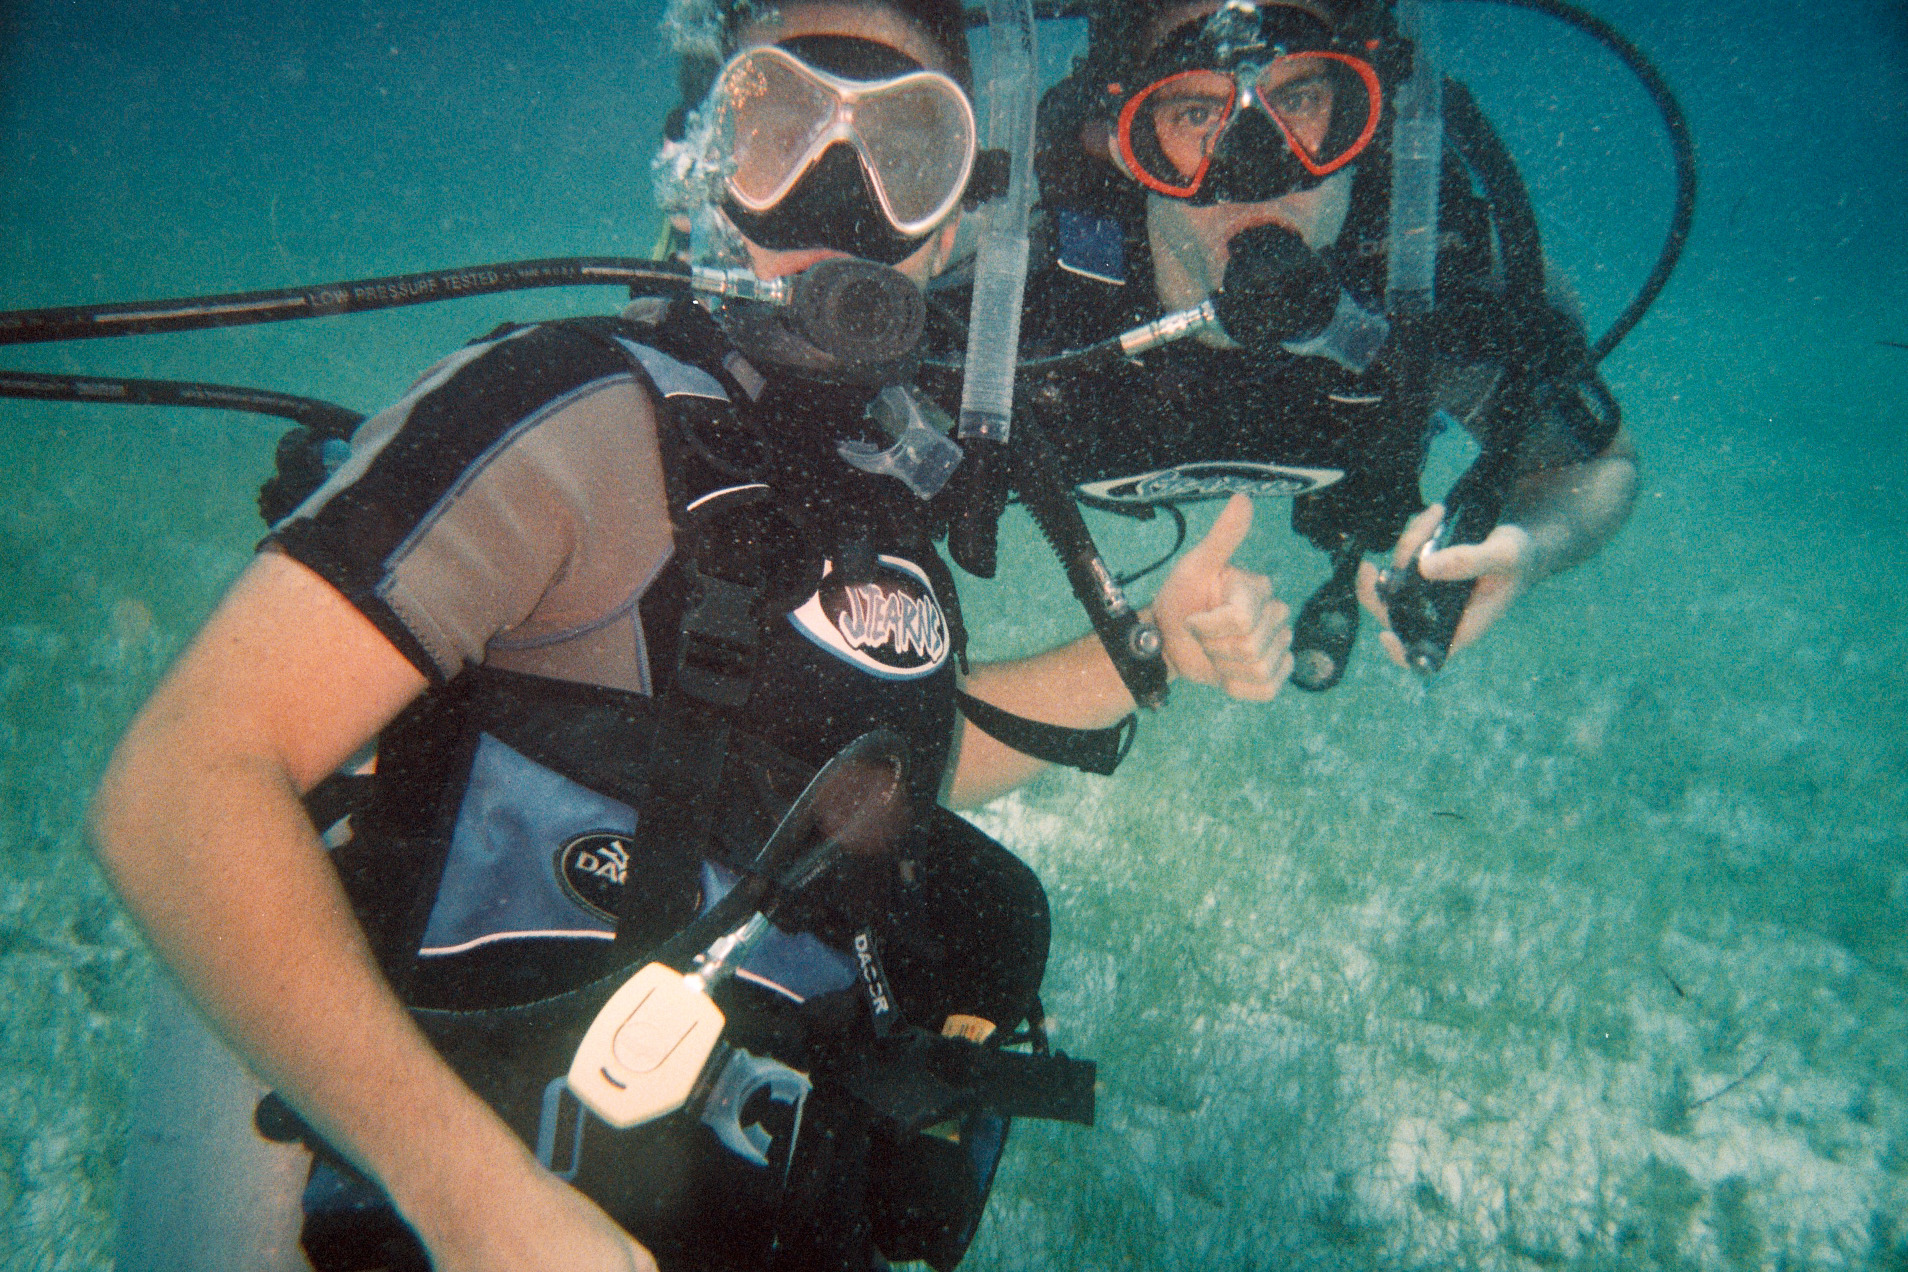  Scuba diving on our honeymoon. 